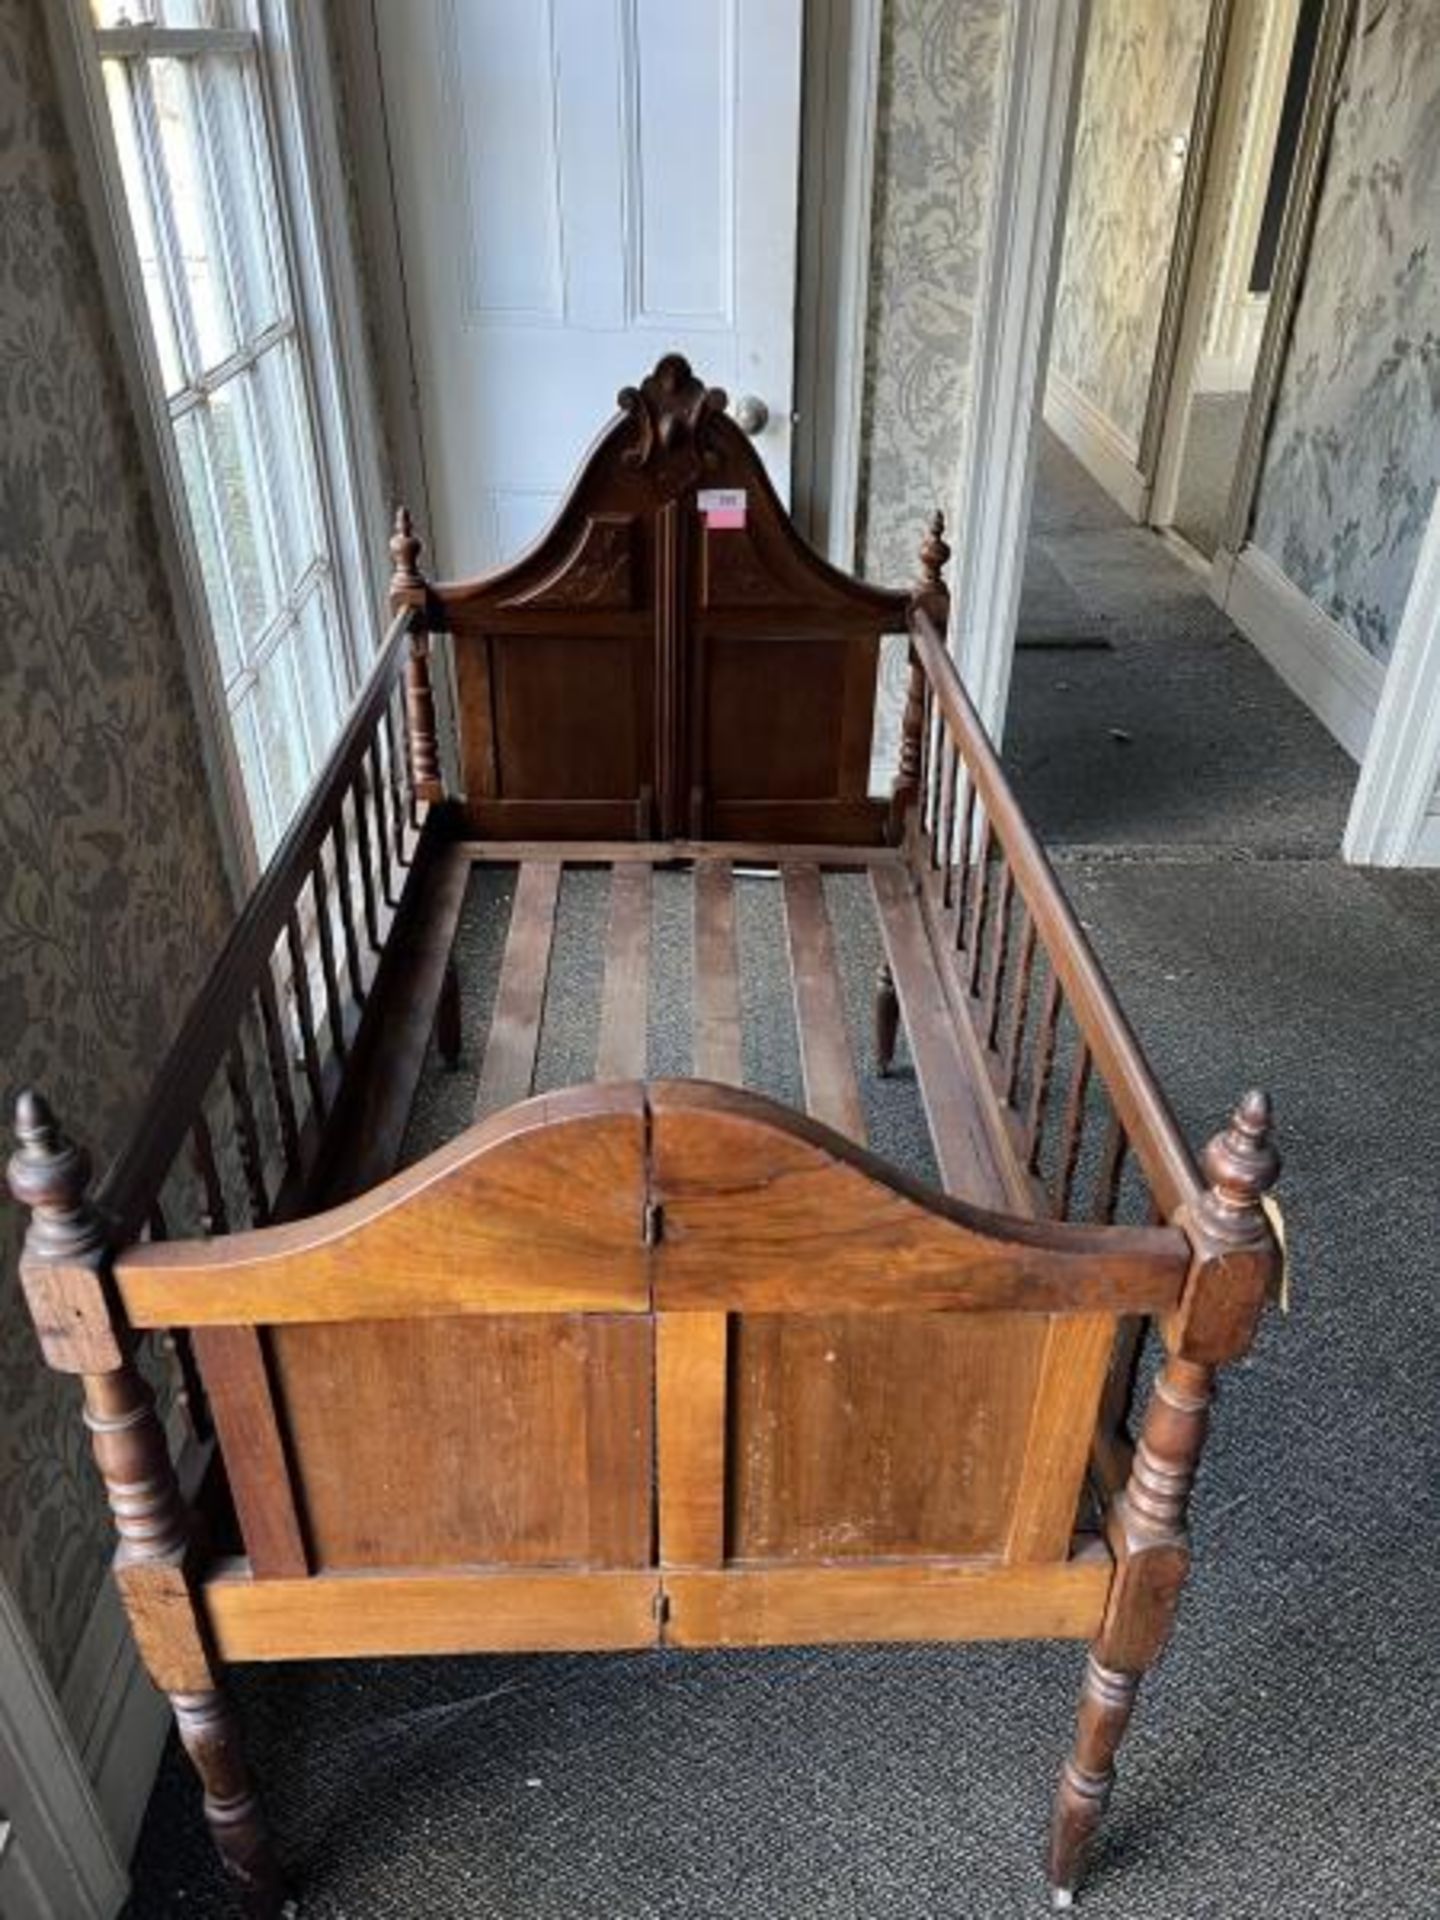 Victorian Folding Crib with Slates Seaport, in Green House - Image 2 of 30